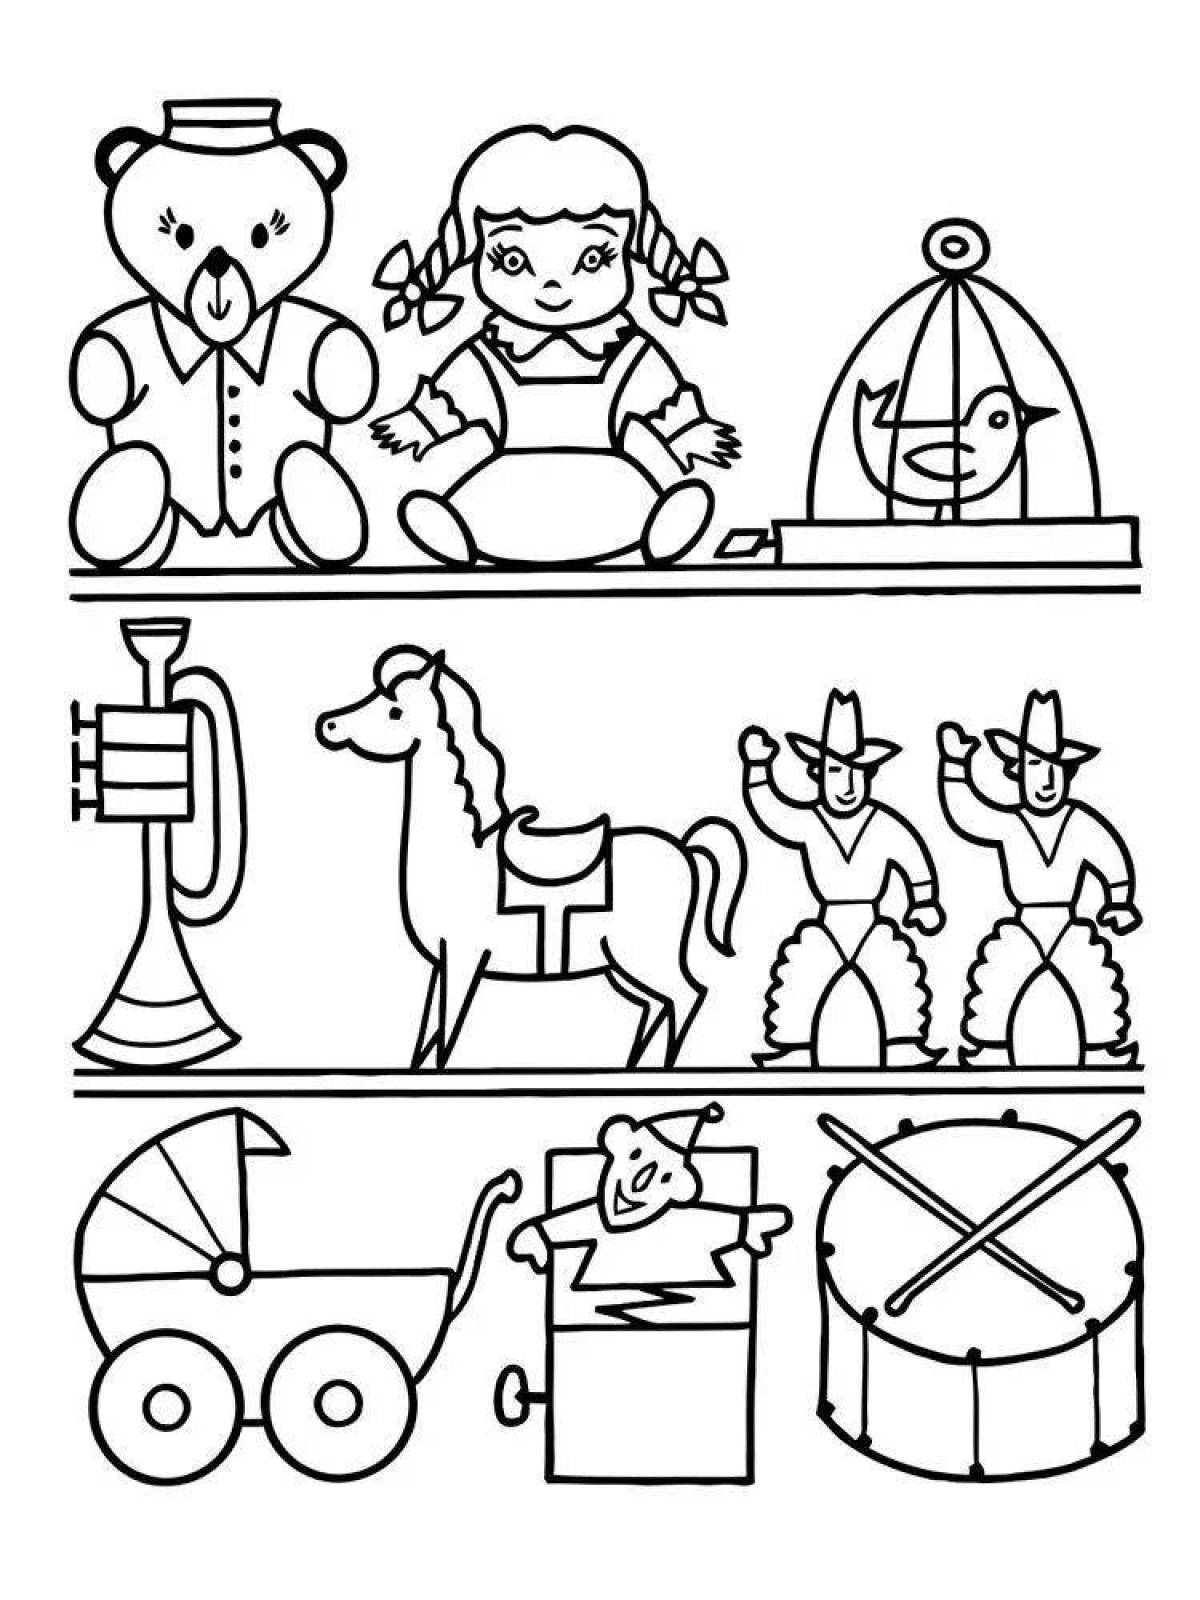 Coloring book adorable kids toys